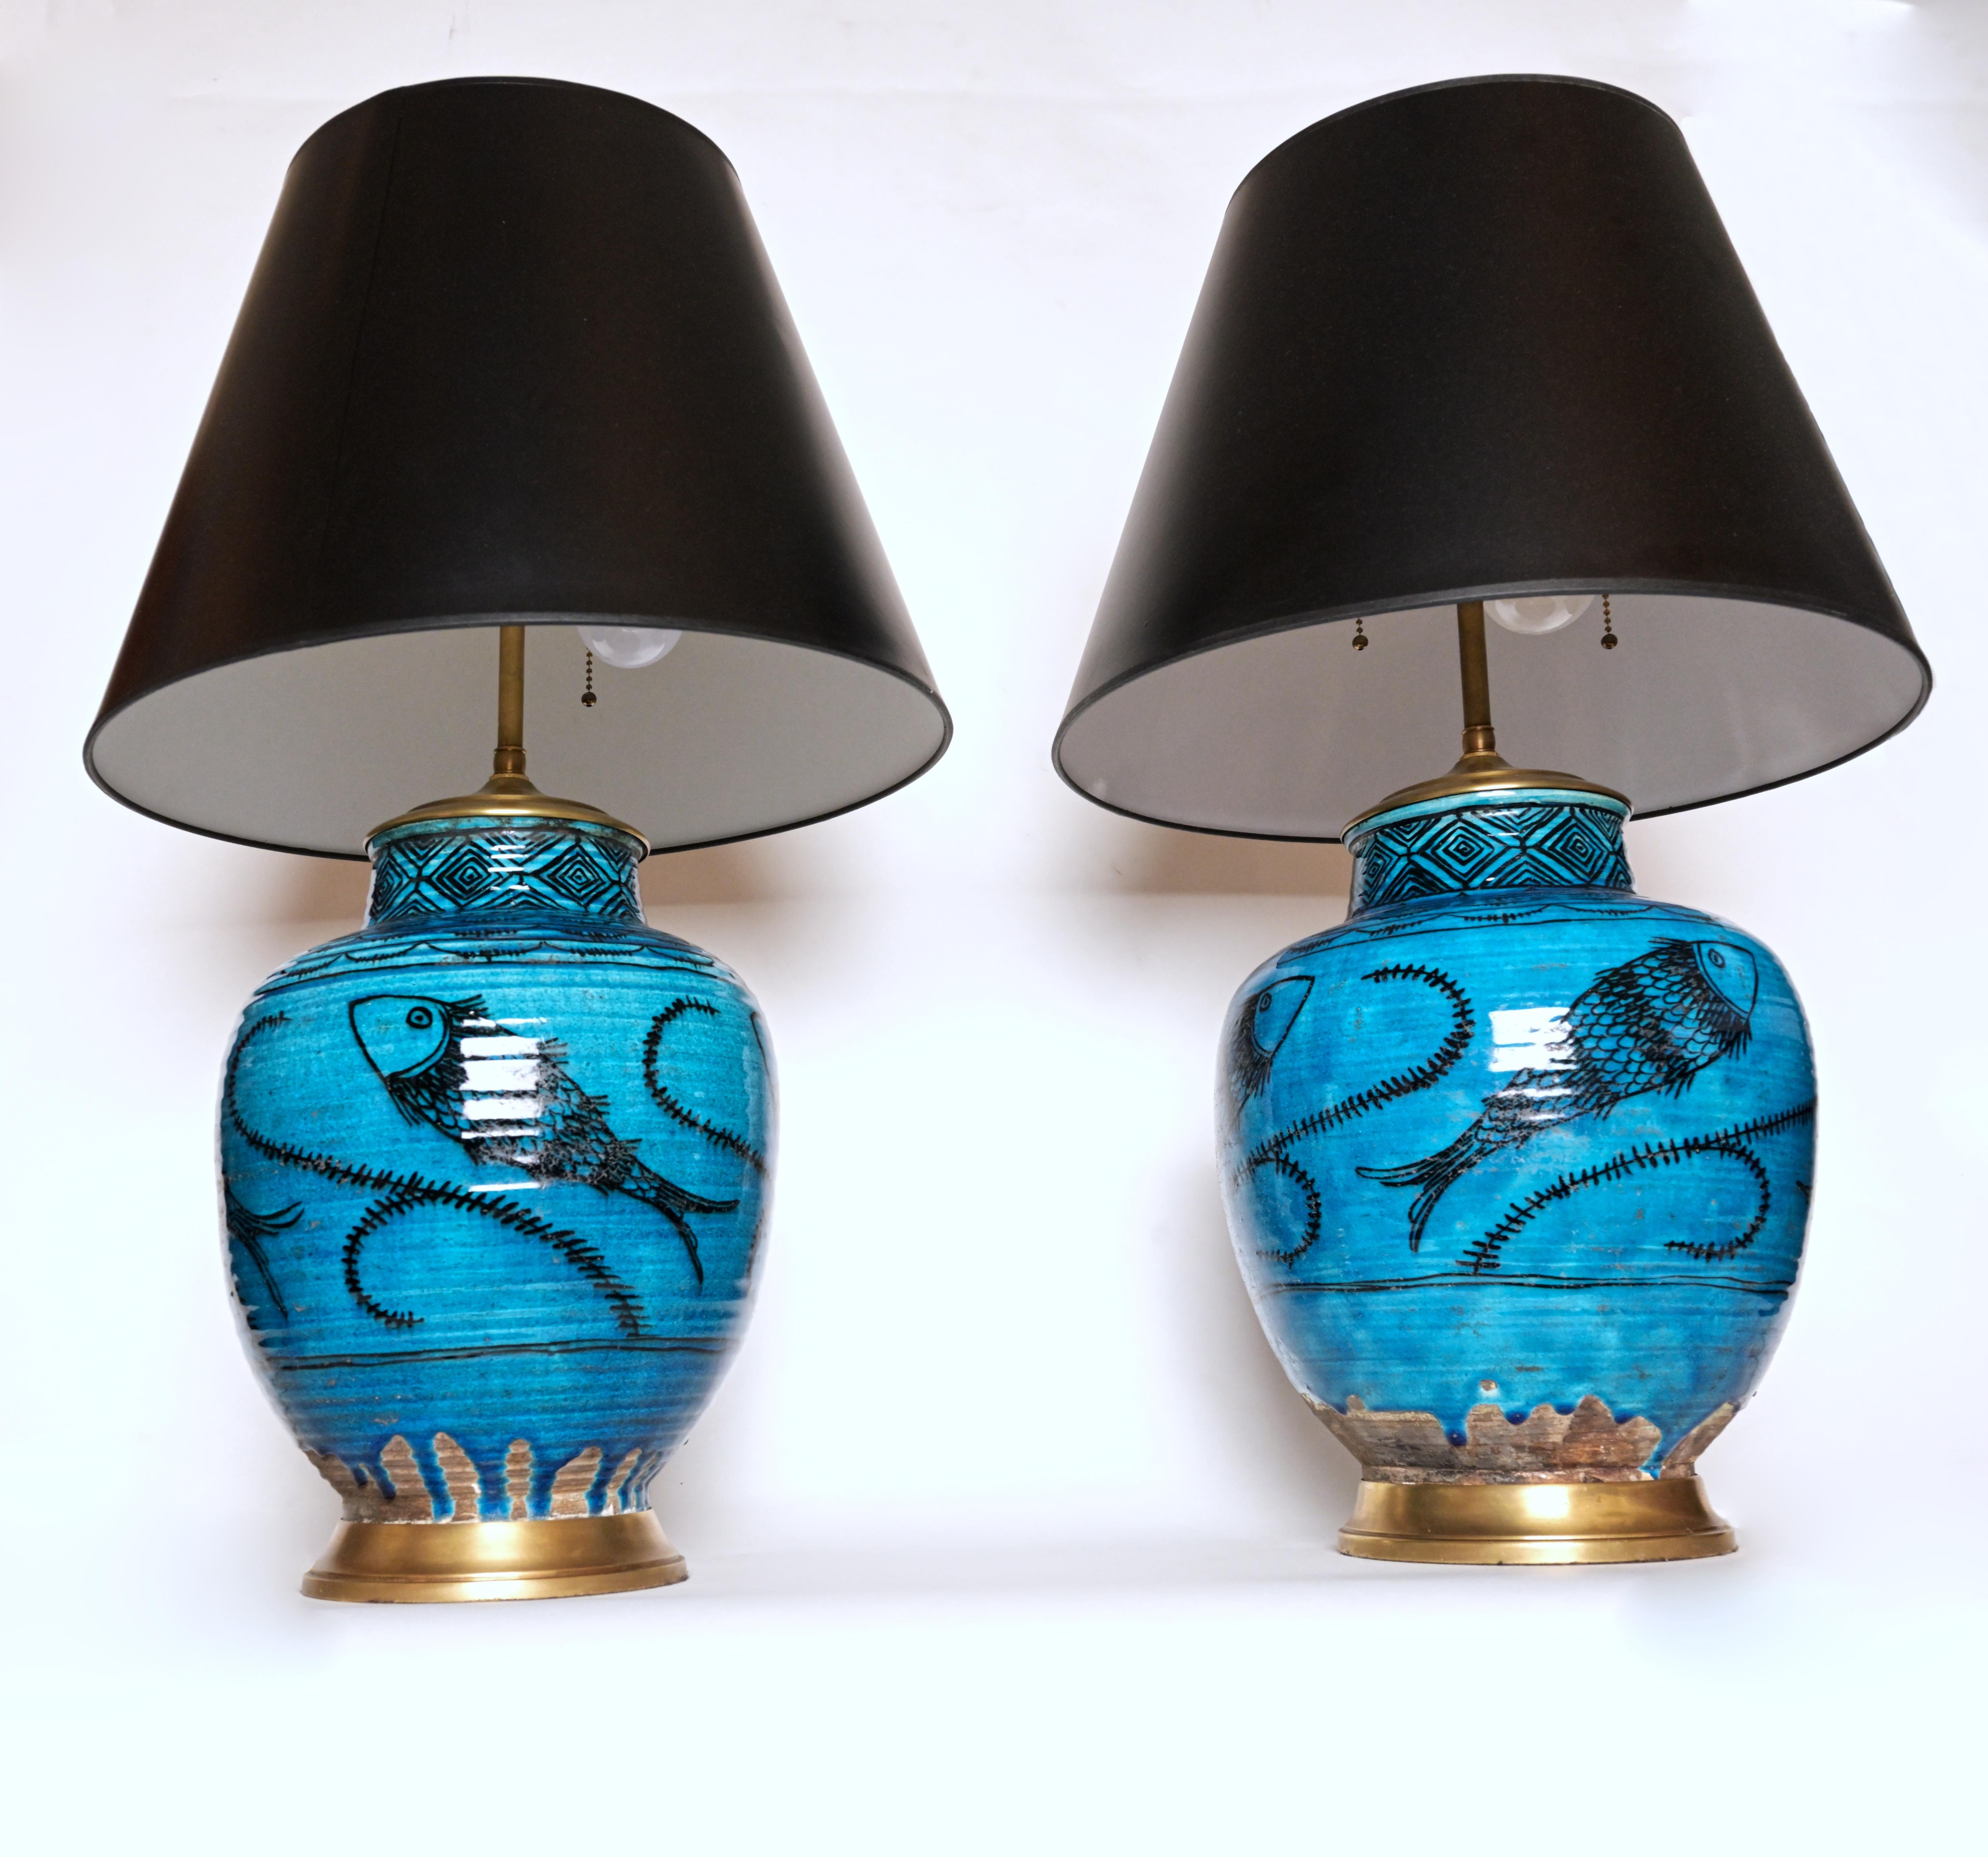 A pair of 1930s French salt glazed vases based on antique Syrian designs depicting stylized fish with seaweed motifs the upper section with black geometric motifs each face with signature dripping gaze at base revealing unglazed ceramic form. Vases